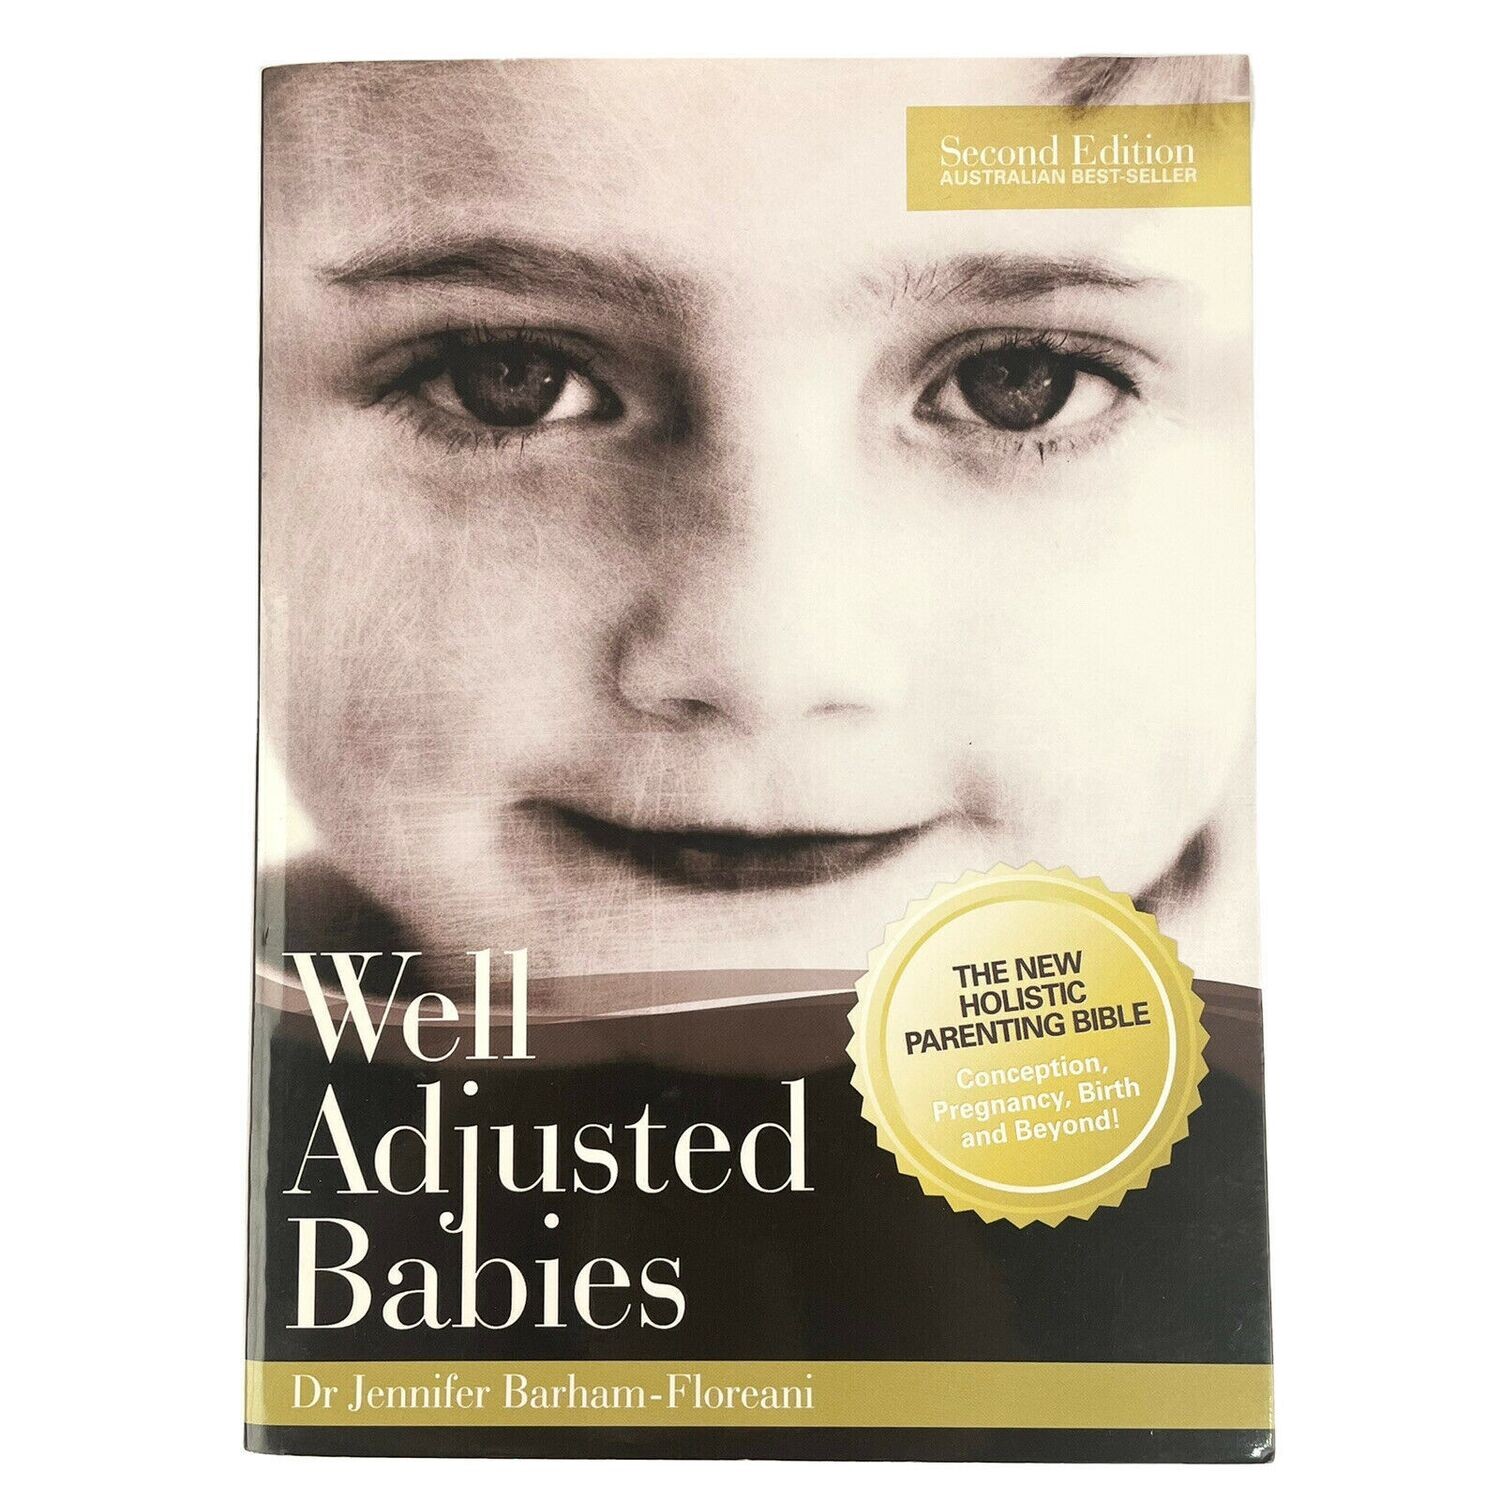 Well Adjusted Babies: The new holistic parenting bible*